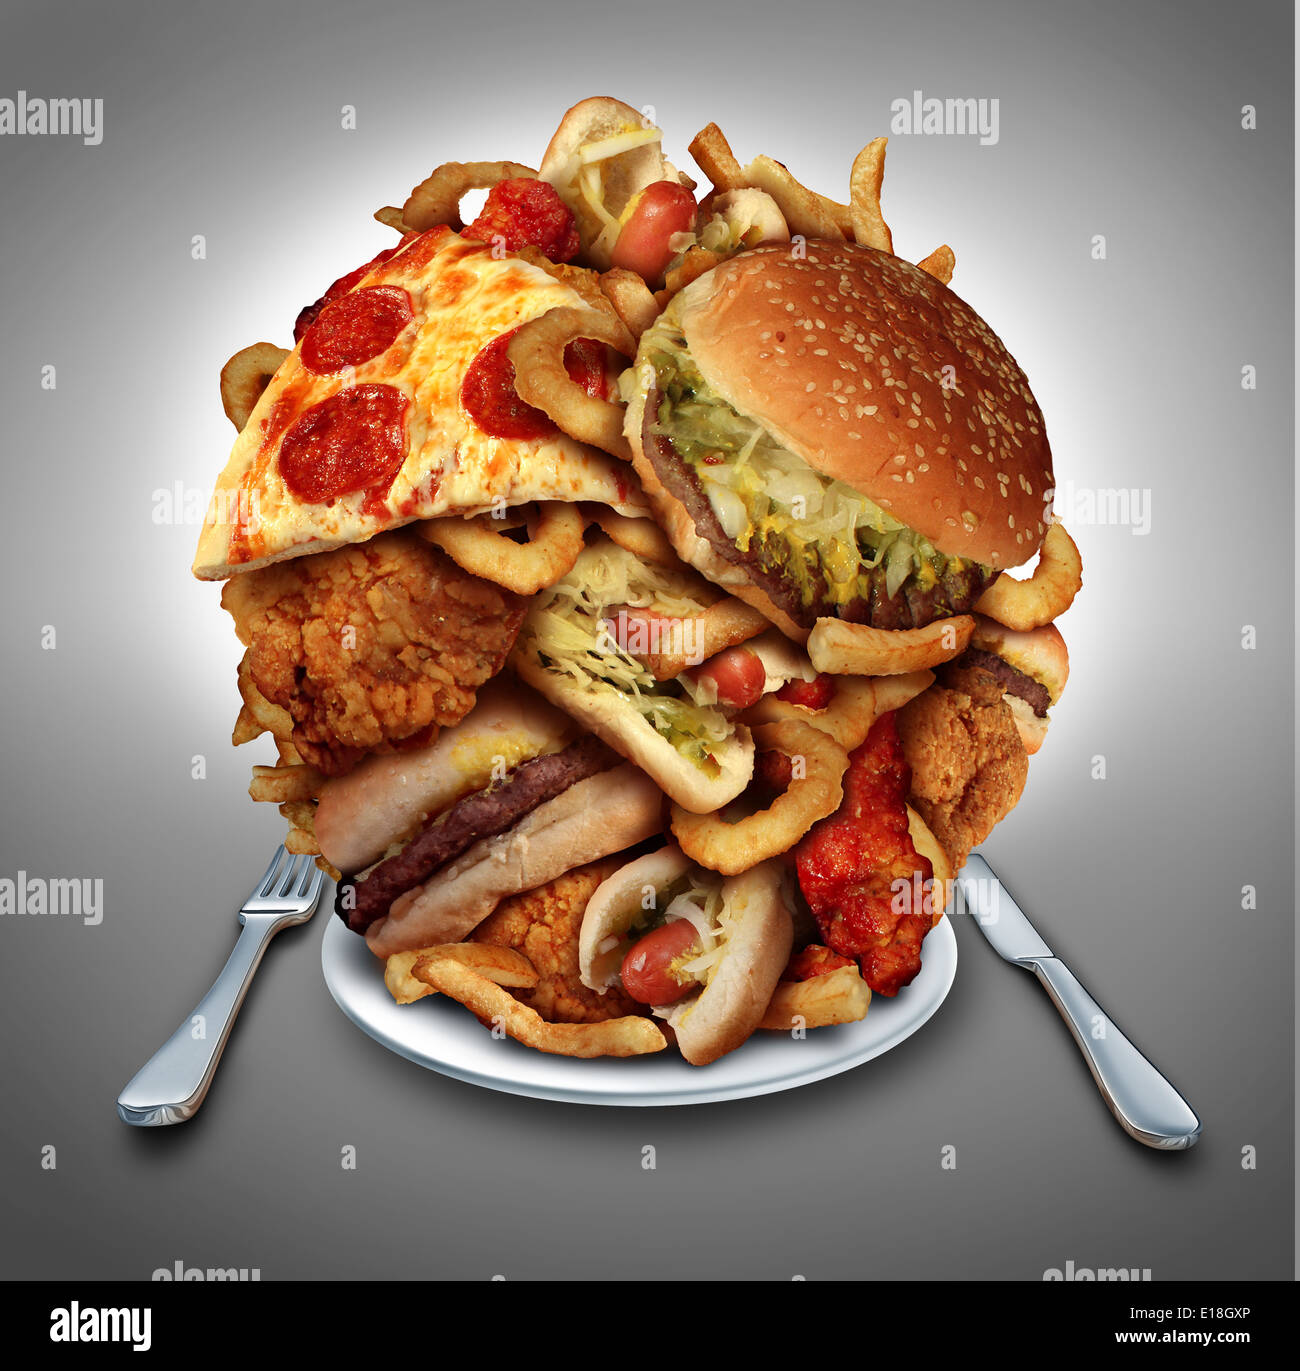 Fast food diet concept served on a plate as a mountain of greasy fried restaurant take out as onion rings burger and hot dogs with fried chicken french fries and pizza as a symbol of compulsive overeating and dieting temptation resulting in unhealthy nutr Stock Photo